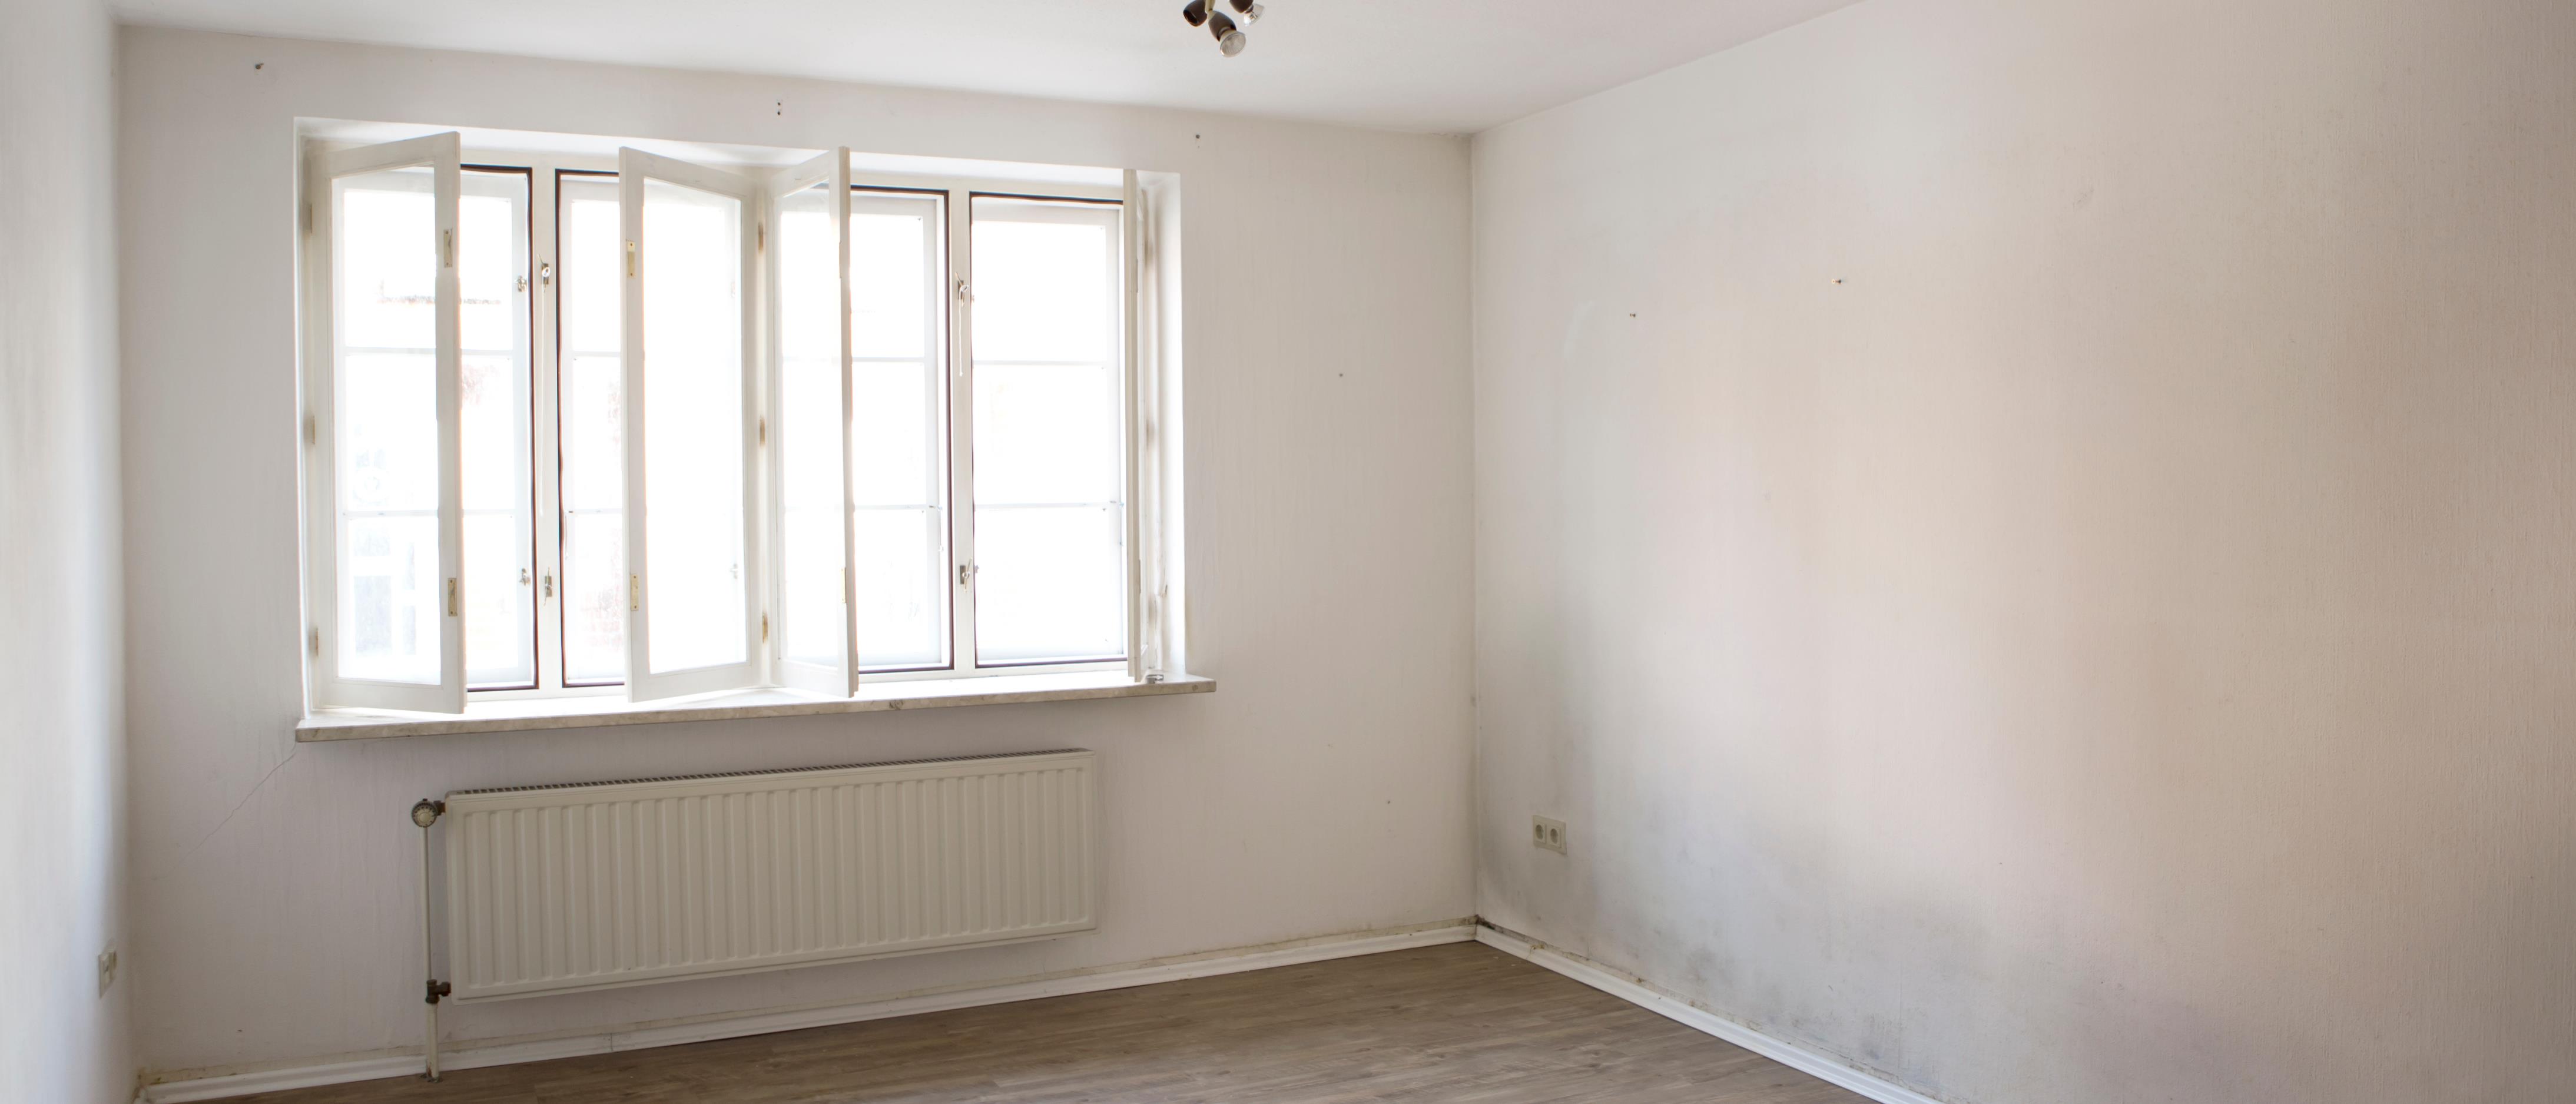 How to fight winter mould: Advice for tenants